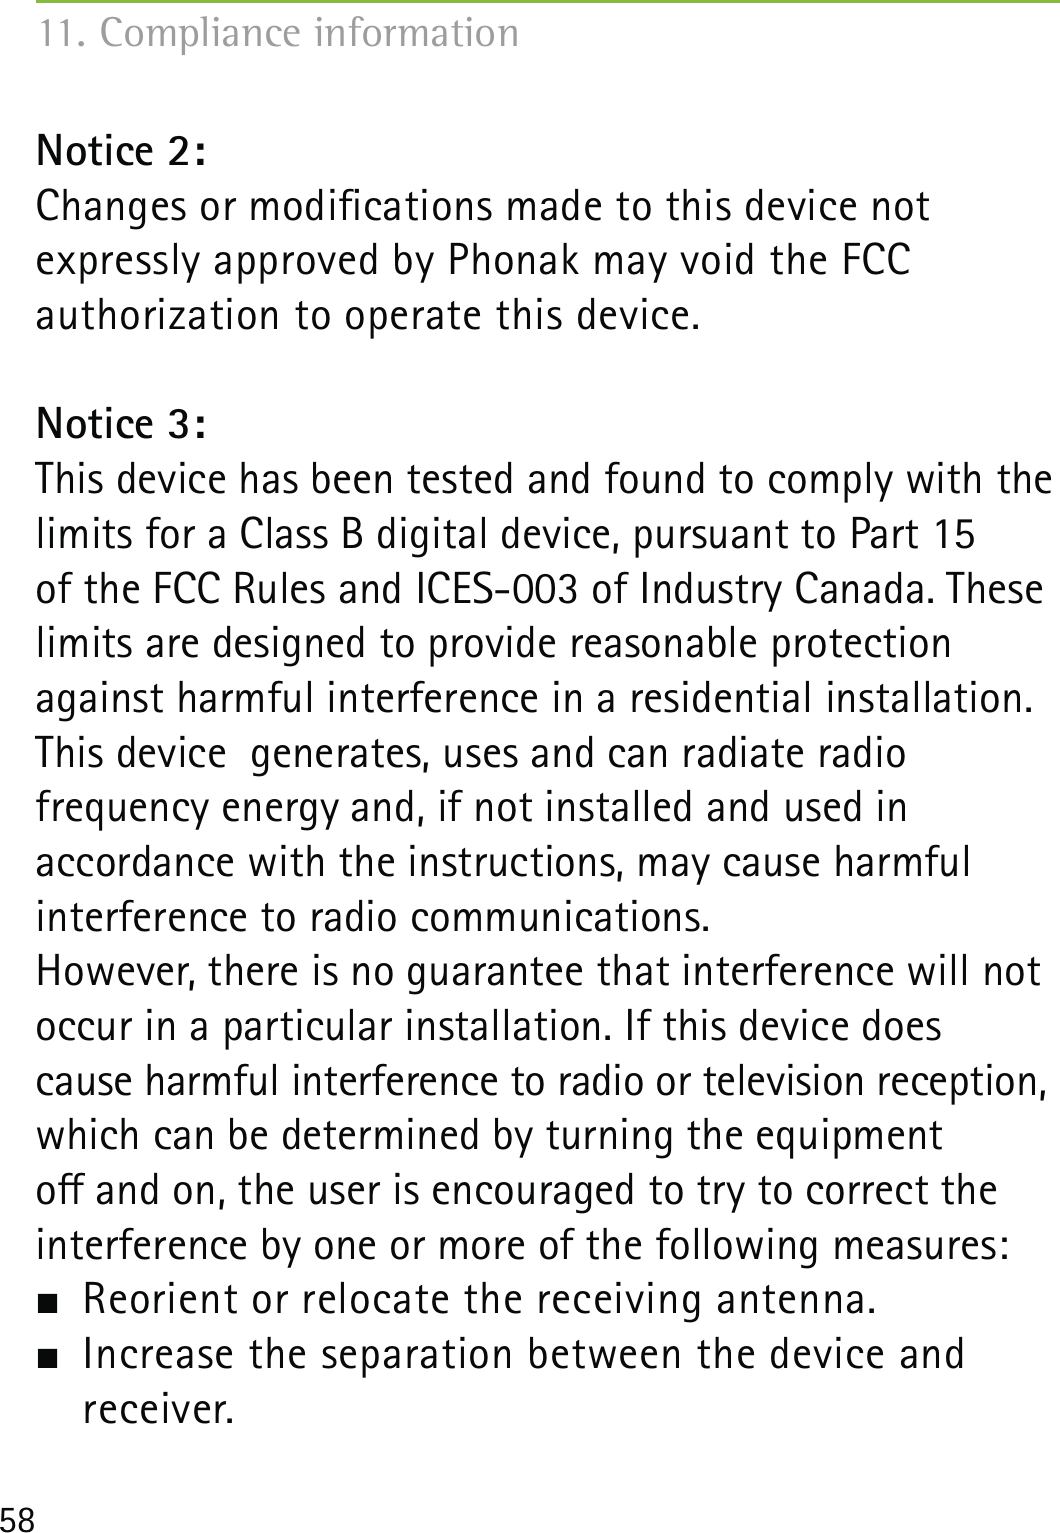 58Notice 2:Changes or modications made to this device not  expressly approved by Phonak may void the FCC  authorization to operate this device.Notice 3:This device has been tested and found to comply with the limits for a Class B digital device, pursuant to Part 15  of the FCC Rules and ICES-003 of Industry Canada. These limits are designed to provide reasonable protection against harmful interference in a residential installation. This device  generates, uses and can radiate radio  frequency energy and, if not installed and used in  accordance with the instructions, may cause harmful  interference to radio communications.However, there is no guarantee that interference will not occur in a particular installation. If this device does  cause harmful interference to radio or television reception, which can be determined by turning the equipment  o and on, the user is encouraged to try to correct the interference by one or more of the following measures:  Reorient or relocate the receiving antenna.  Increase the separation between the device and  receiver.11. Compliance information